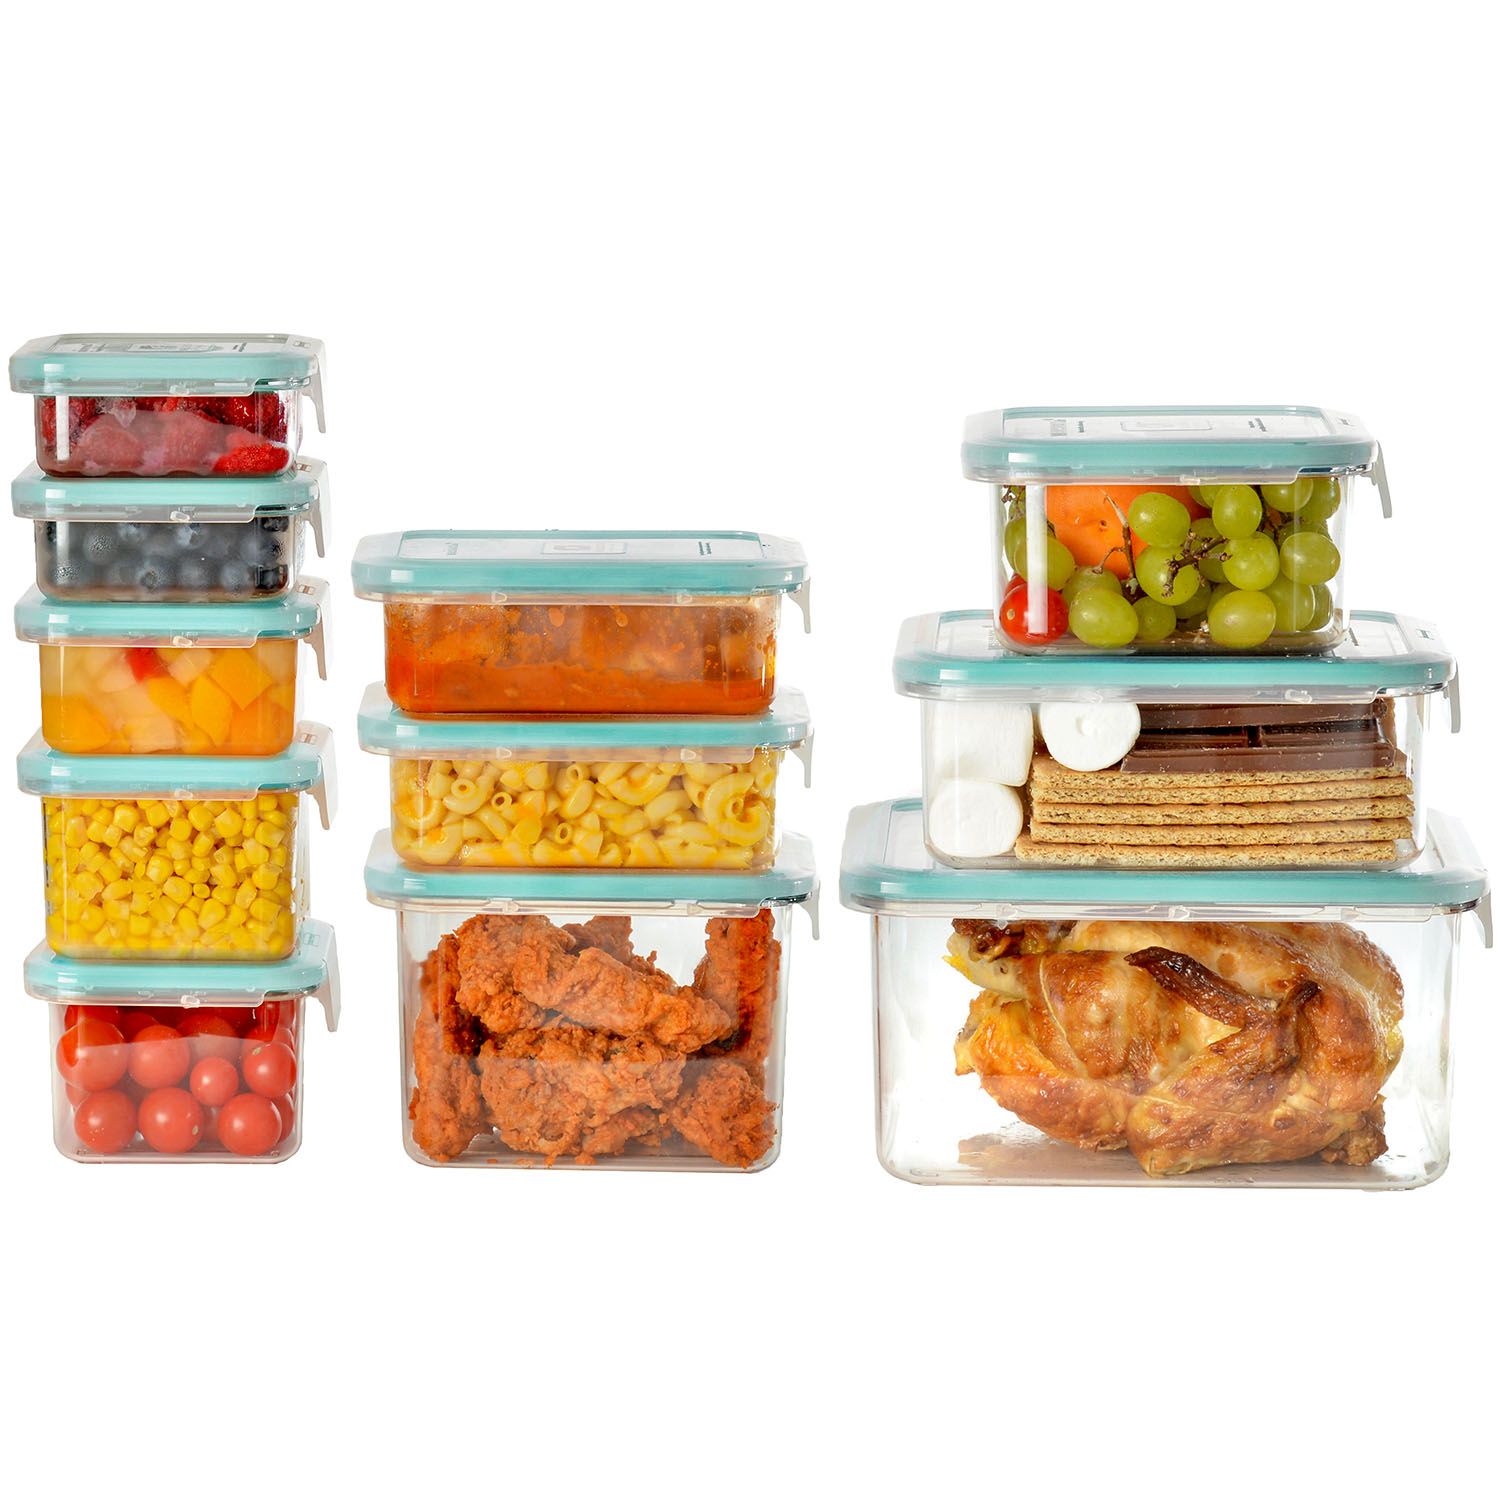 Wellslock Classic 1-Lock 22-Piece Food Storage Container Deluxe Pack